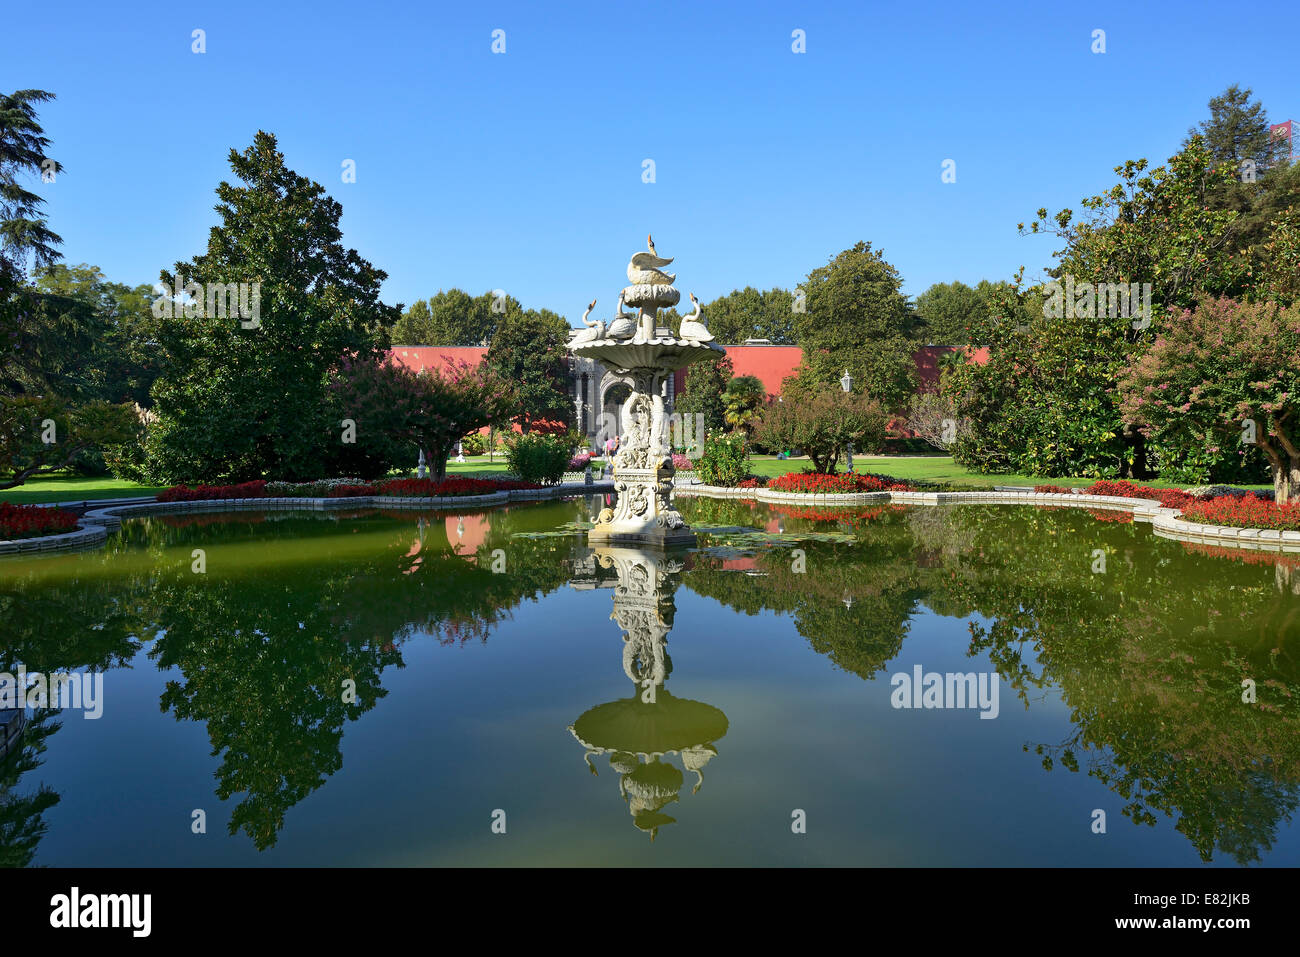 Turkey, Istanbul, Swan fountain in the garden at Dolmabahce Palace Stock Photo